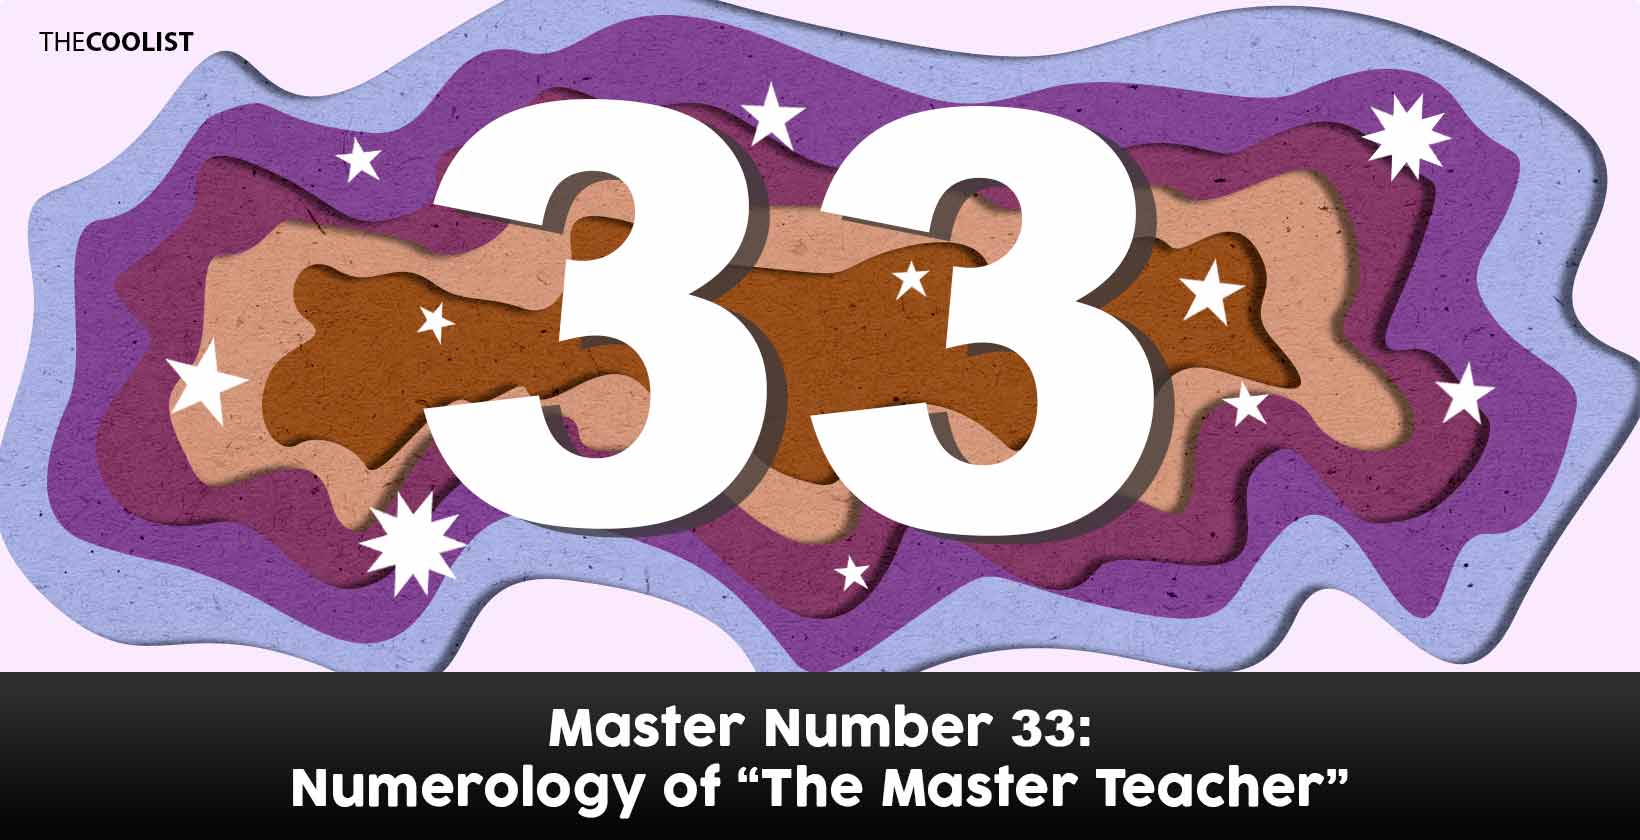 Master Number 33: Numerology of "The Master Teacher"